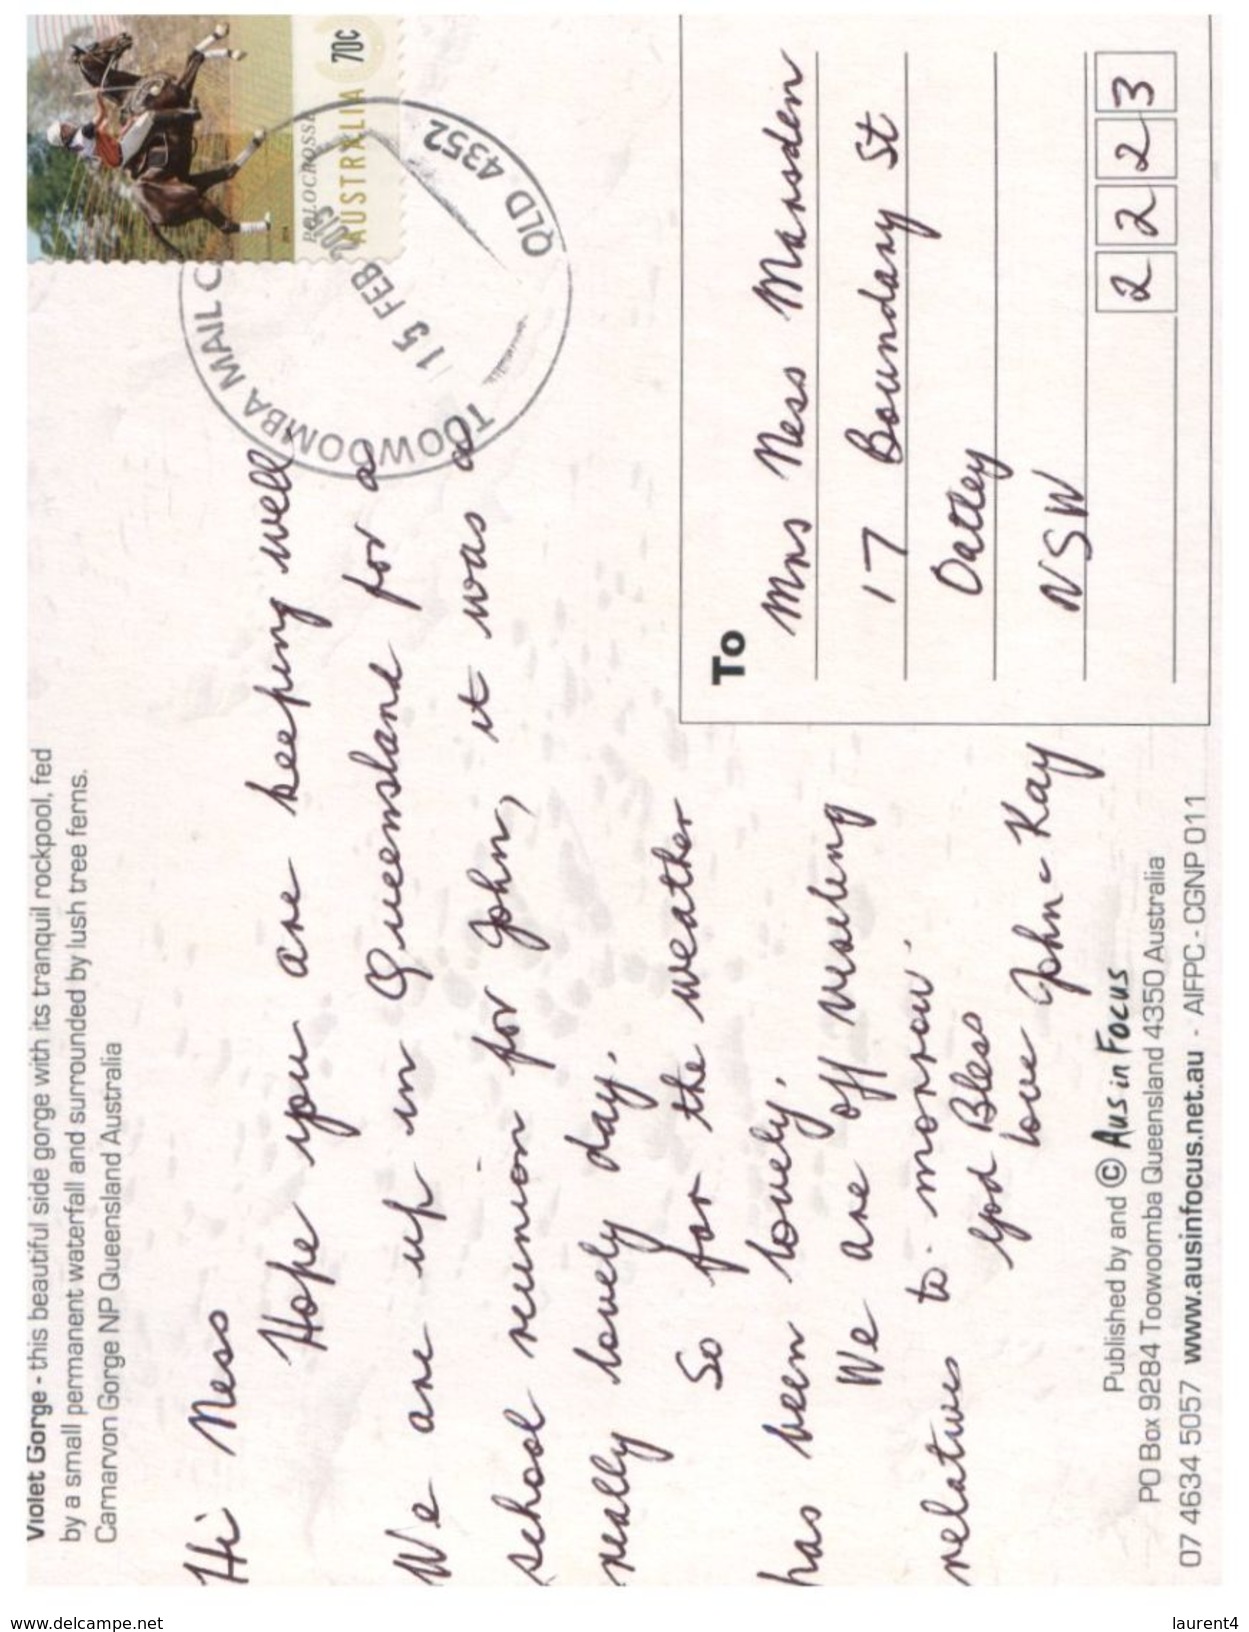 (745) Australia - QLD - Violet Gorge (with Stamp At Back Of Card) - Cairns